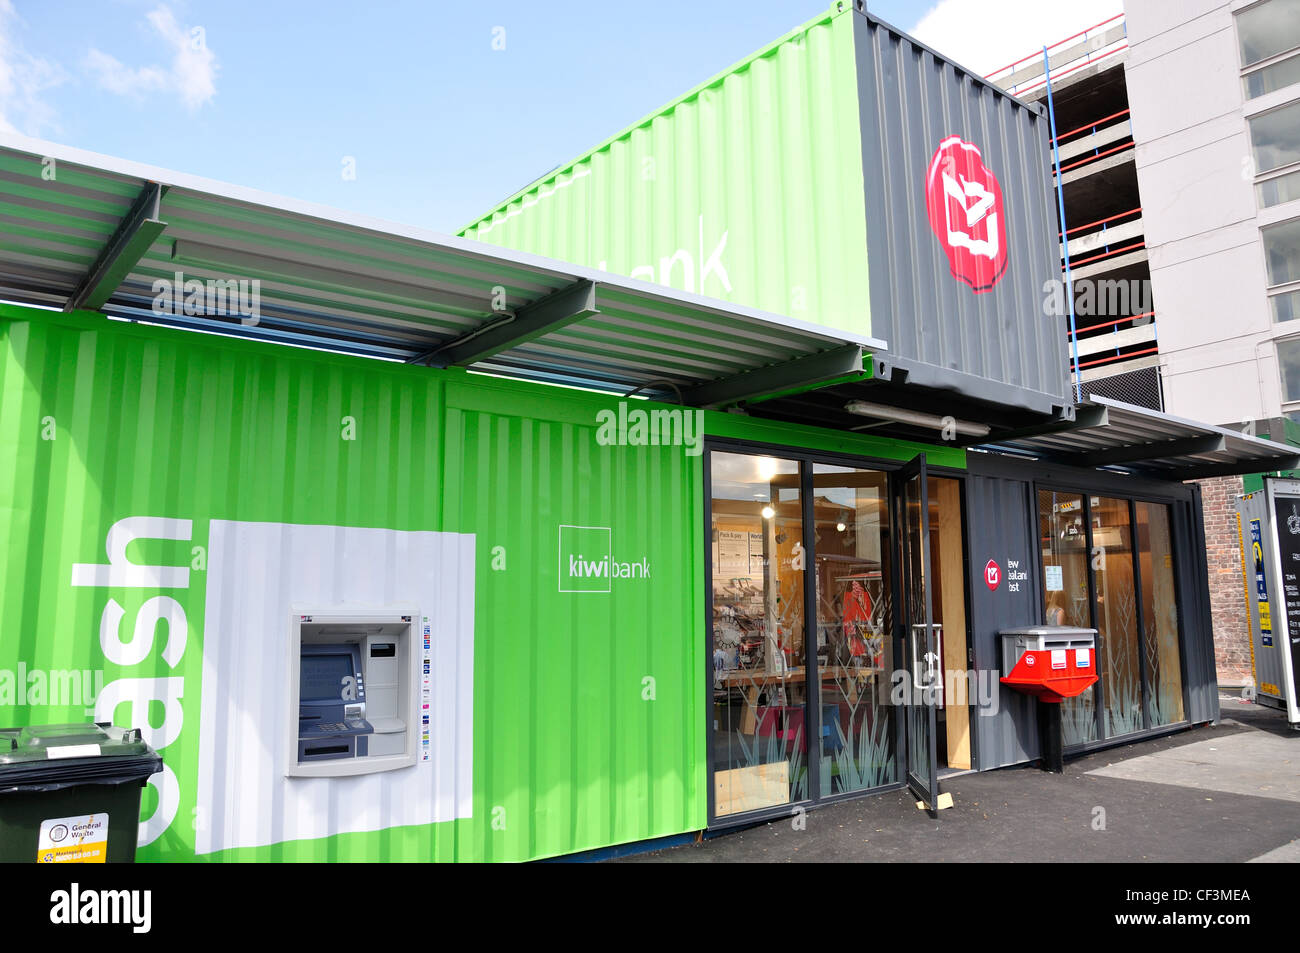 Re:start Container City built after earthquakes, Cashel Mall, CBD, Christchurch, Canterbury District, New Zealand Stock Photo